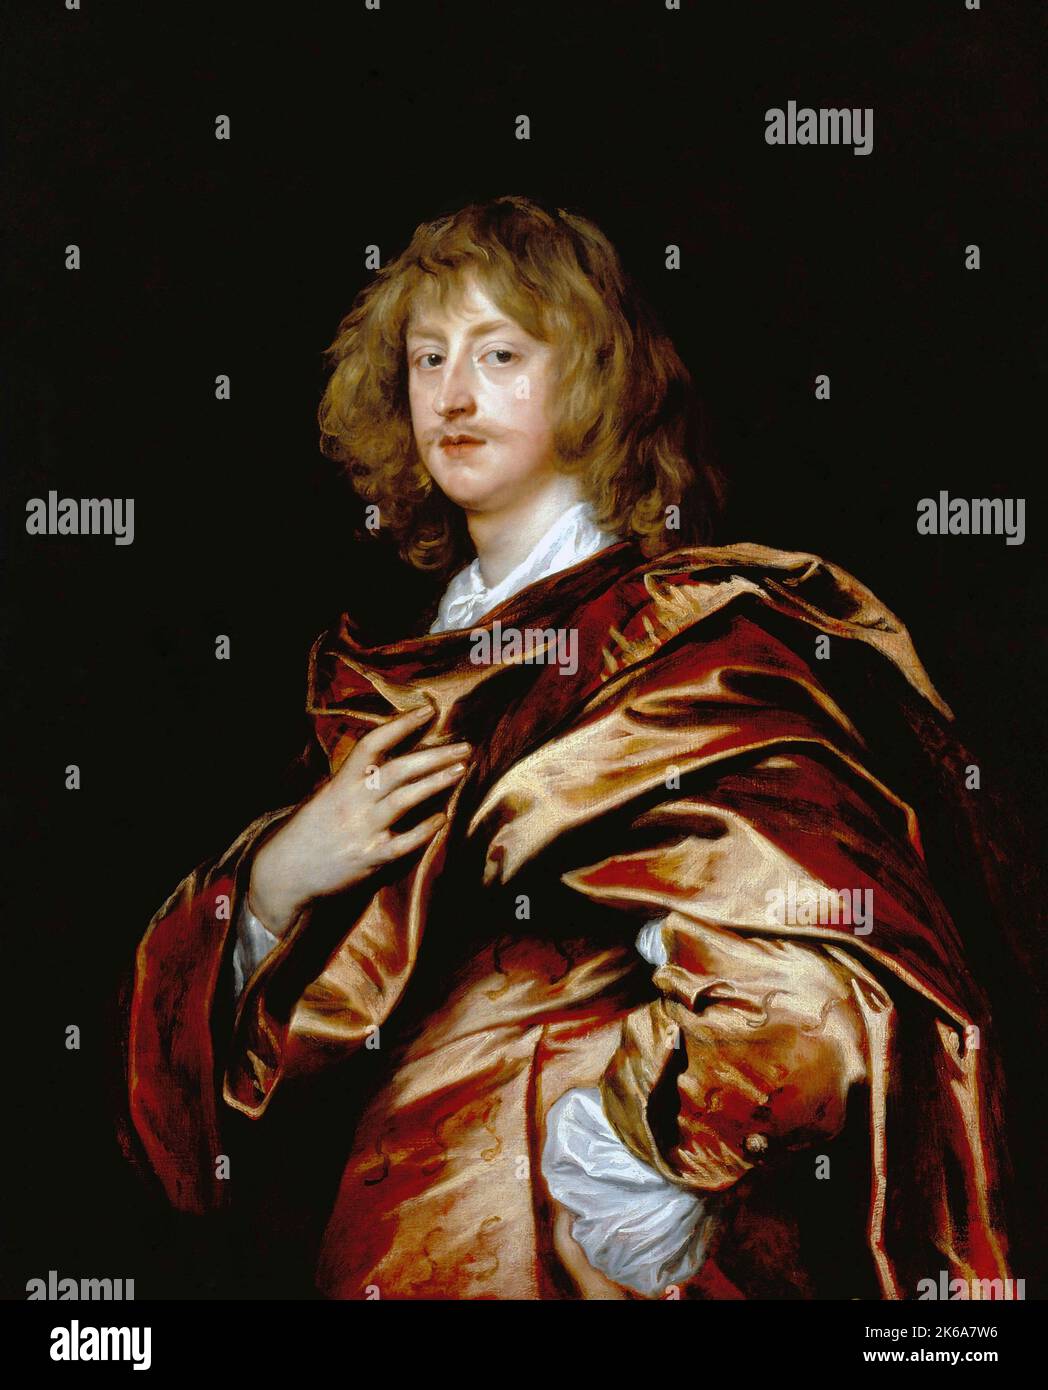 17th century painting of George Digby, 2nd Earl of Bristol. Stock Photo